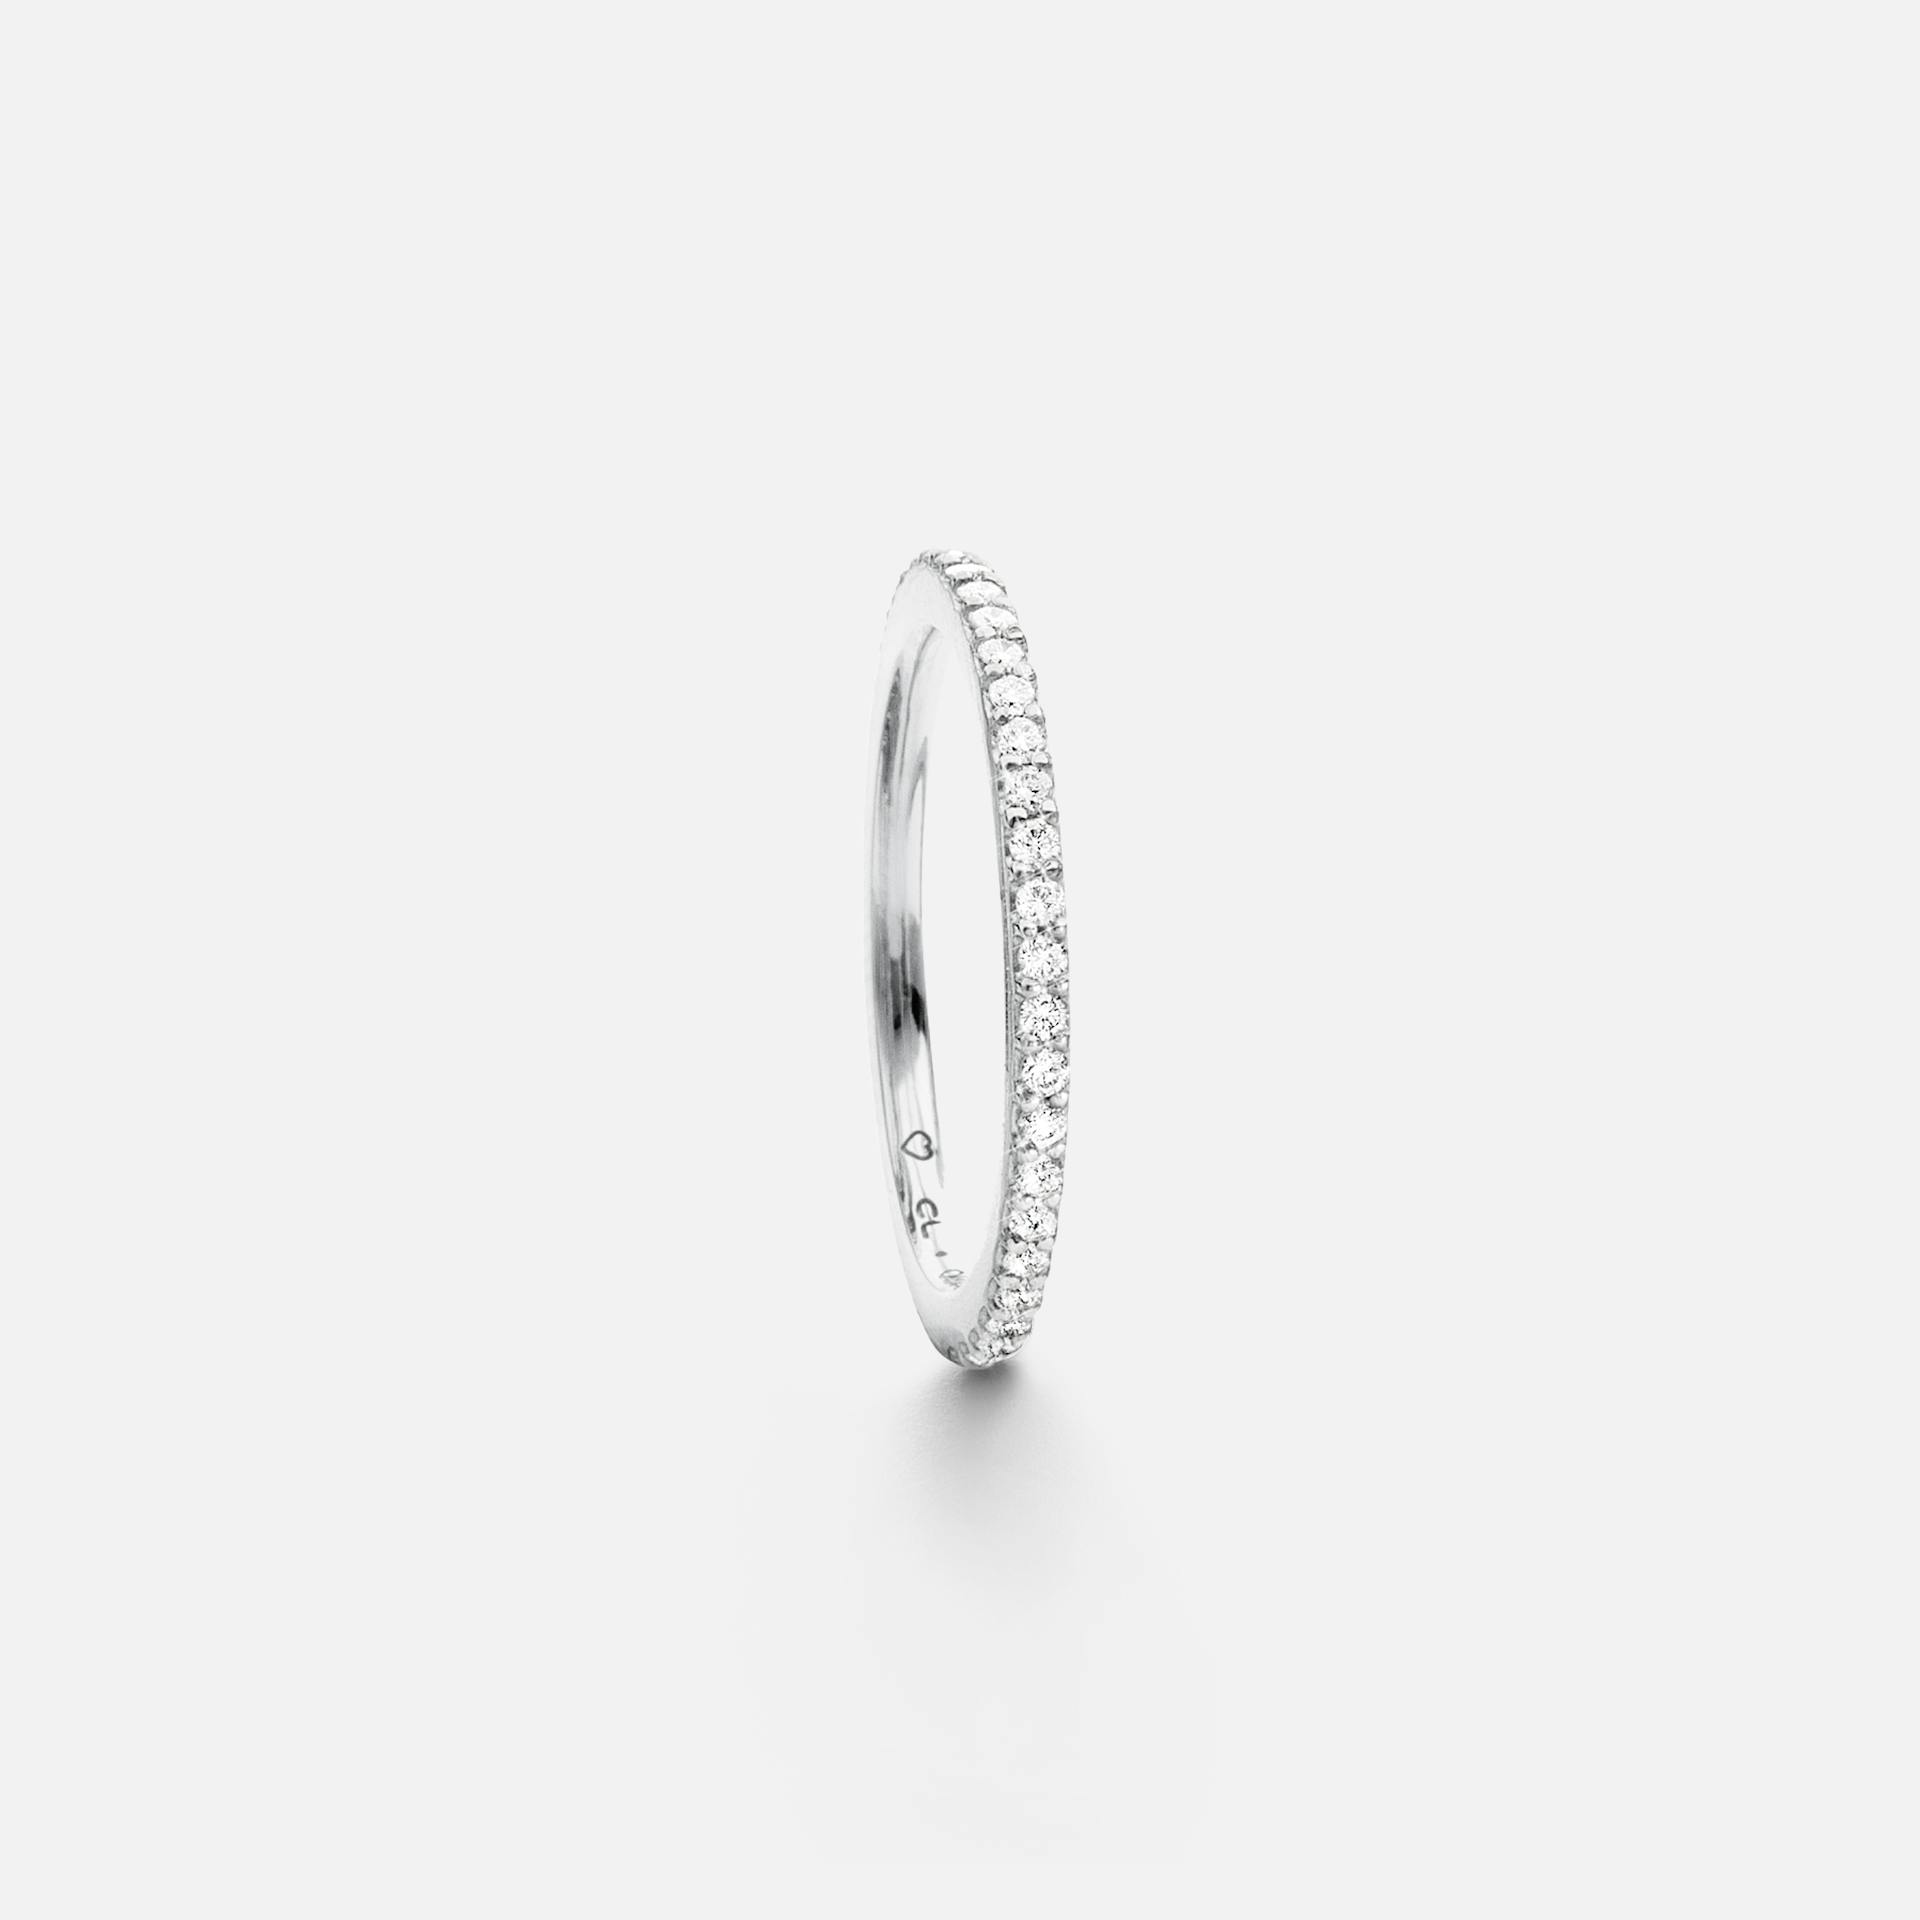 Love Bands Ring in White Gold with Diamonds  |  Ole Lynggaard Copenhagen 